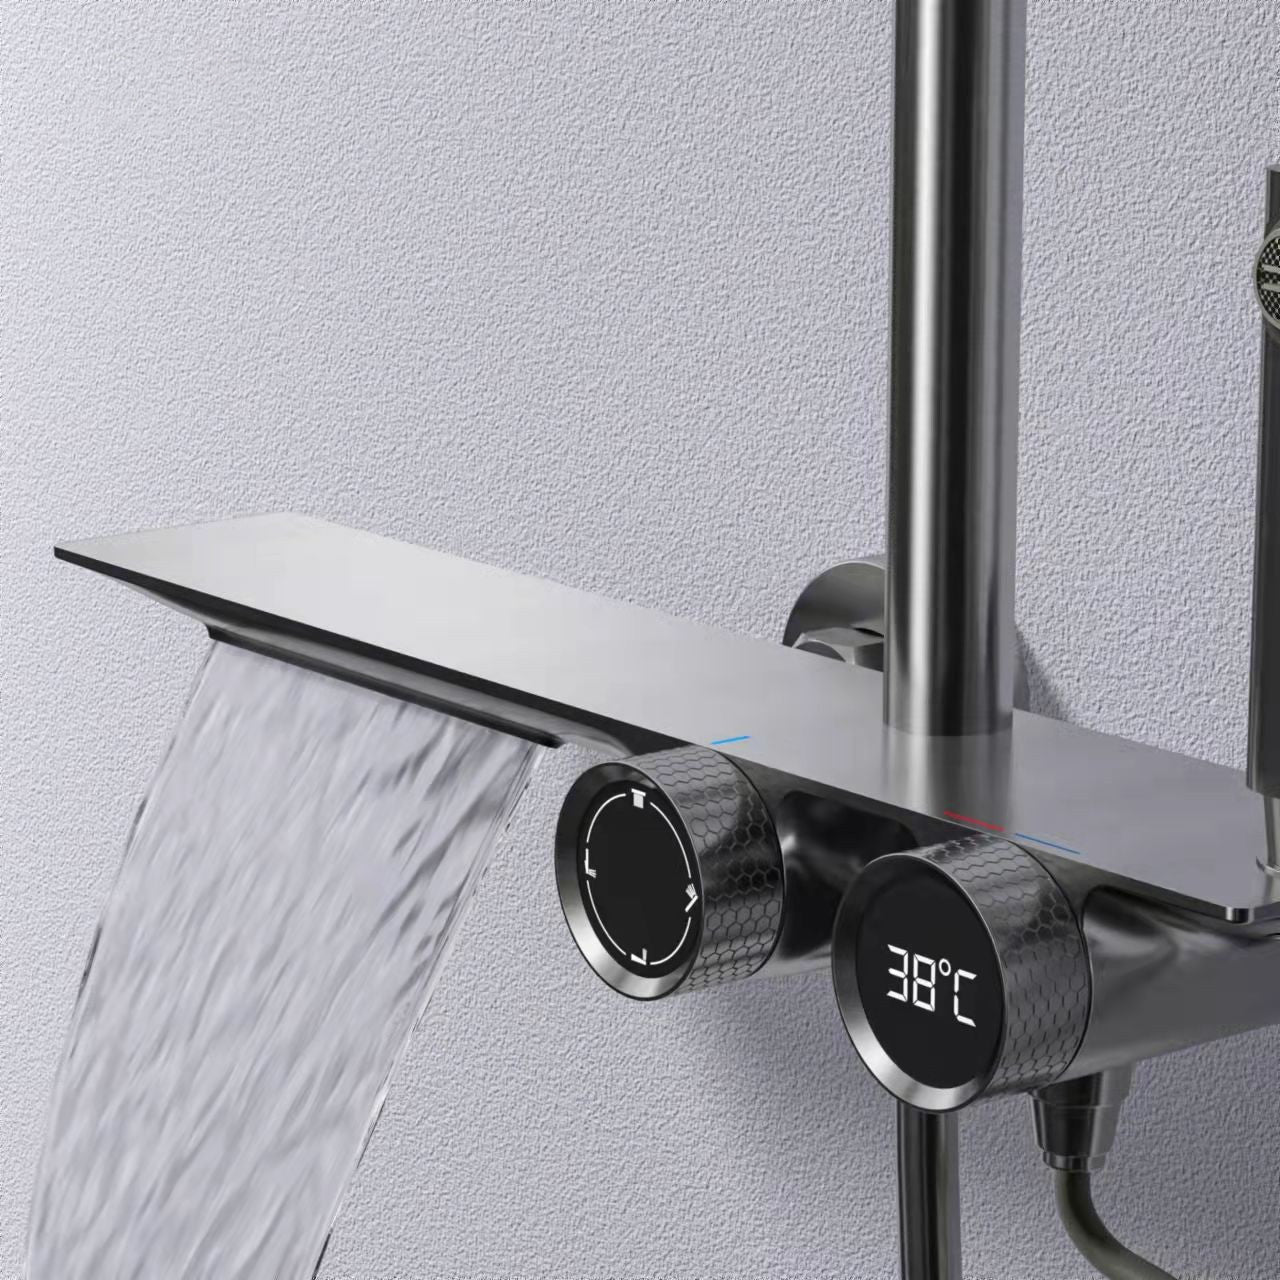 TS-S105 High-End Tomahawk Four-speed Pulse Massage One-button One-control Four-function Shower Set